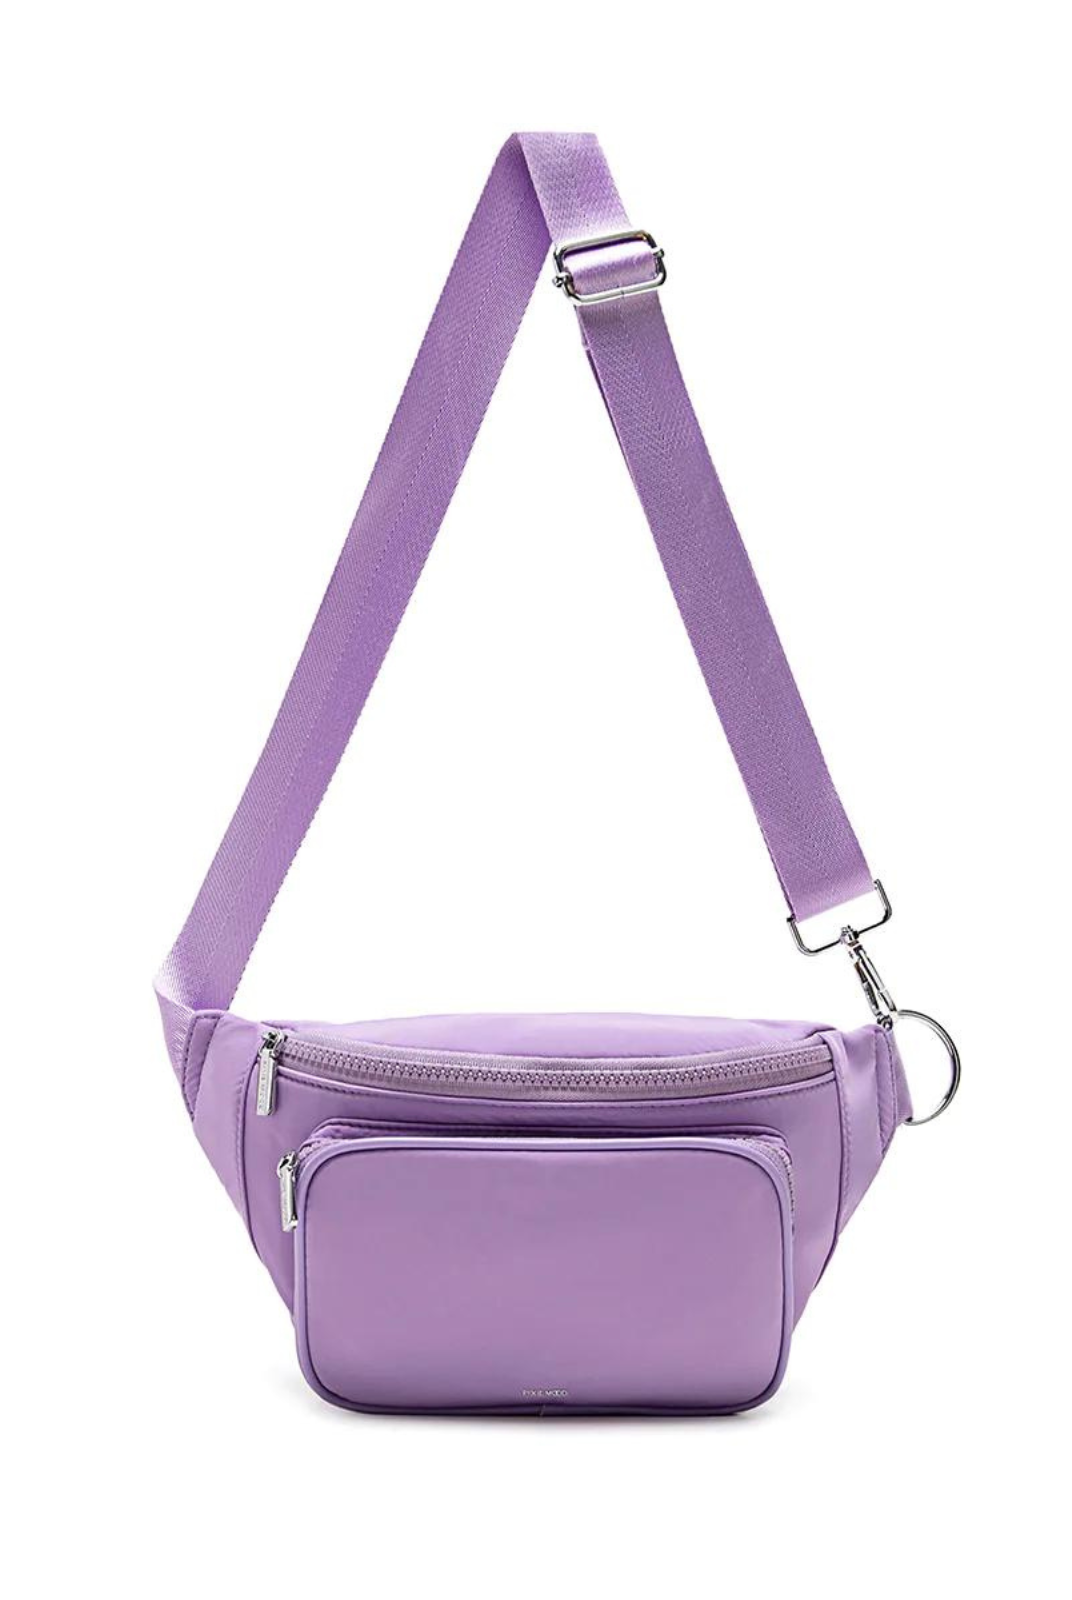 Pixie Mood Aaliyah Fanny Pack-Lavender Nylon. The Aaliyah Fanny Pack is the perfect companion for all your adventures! Its lightweight and sleek design makes it a great addition to any outfit - whether you're going for an athleisure, casual look or an edgy vibe. Plus, the exterior zip pocket allows for easy access to your essentials.